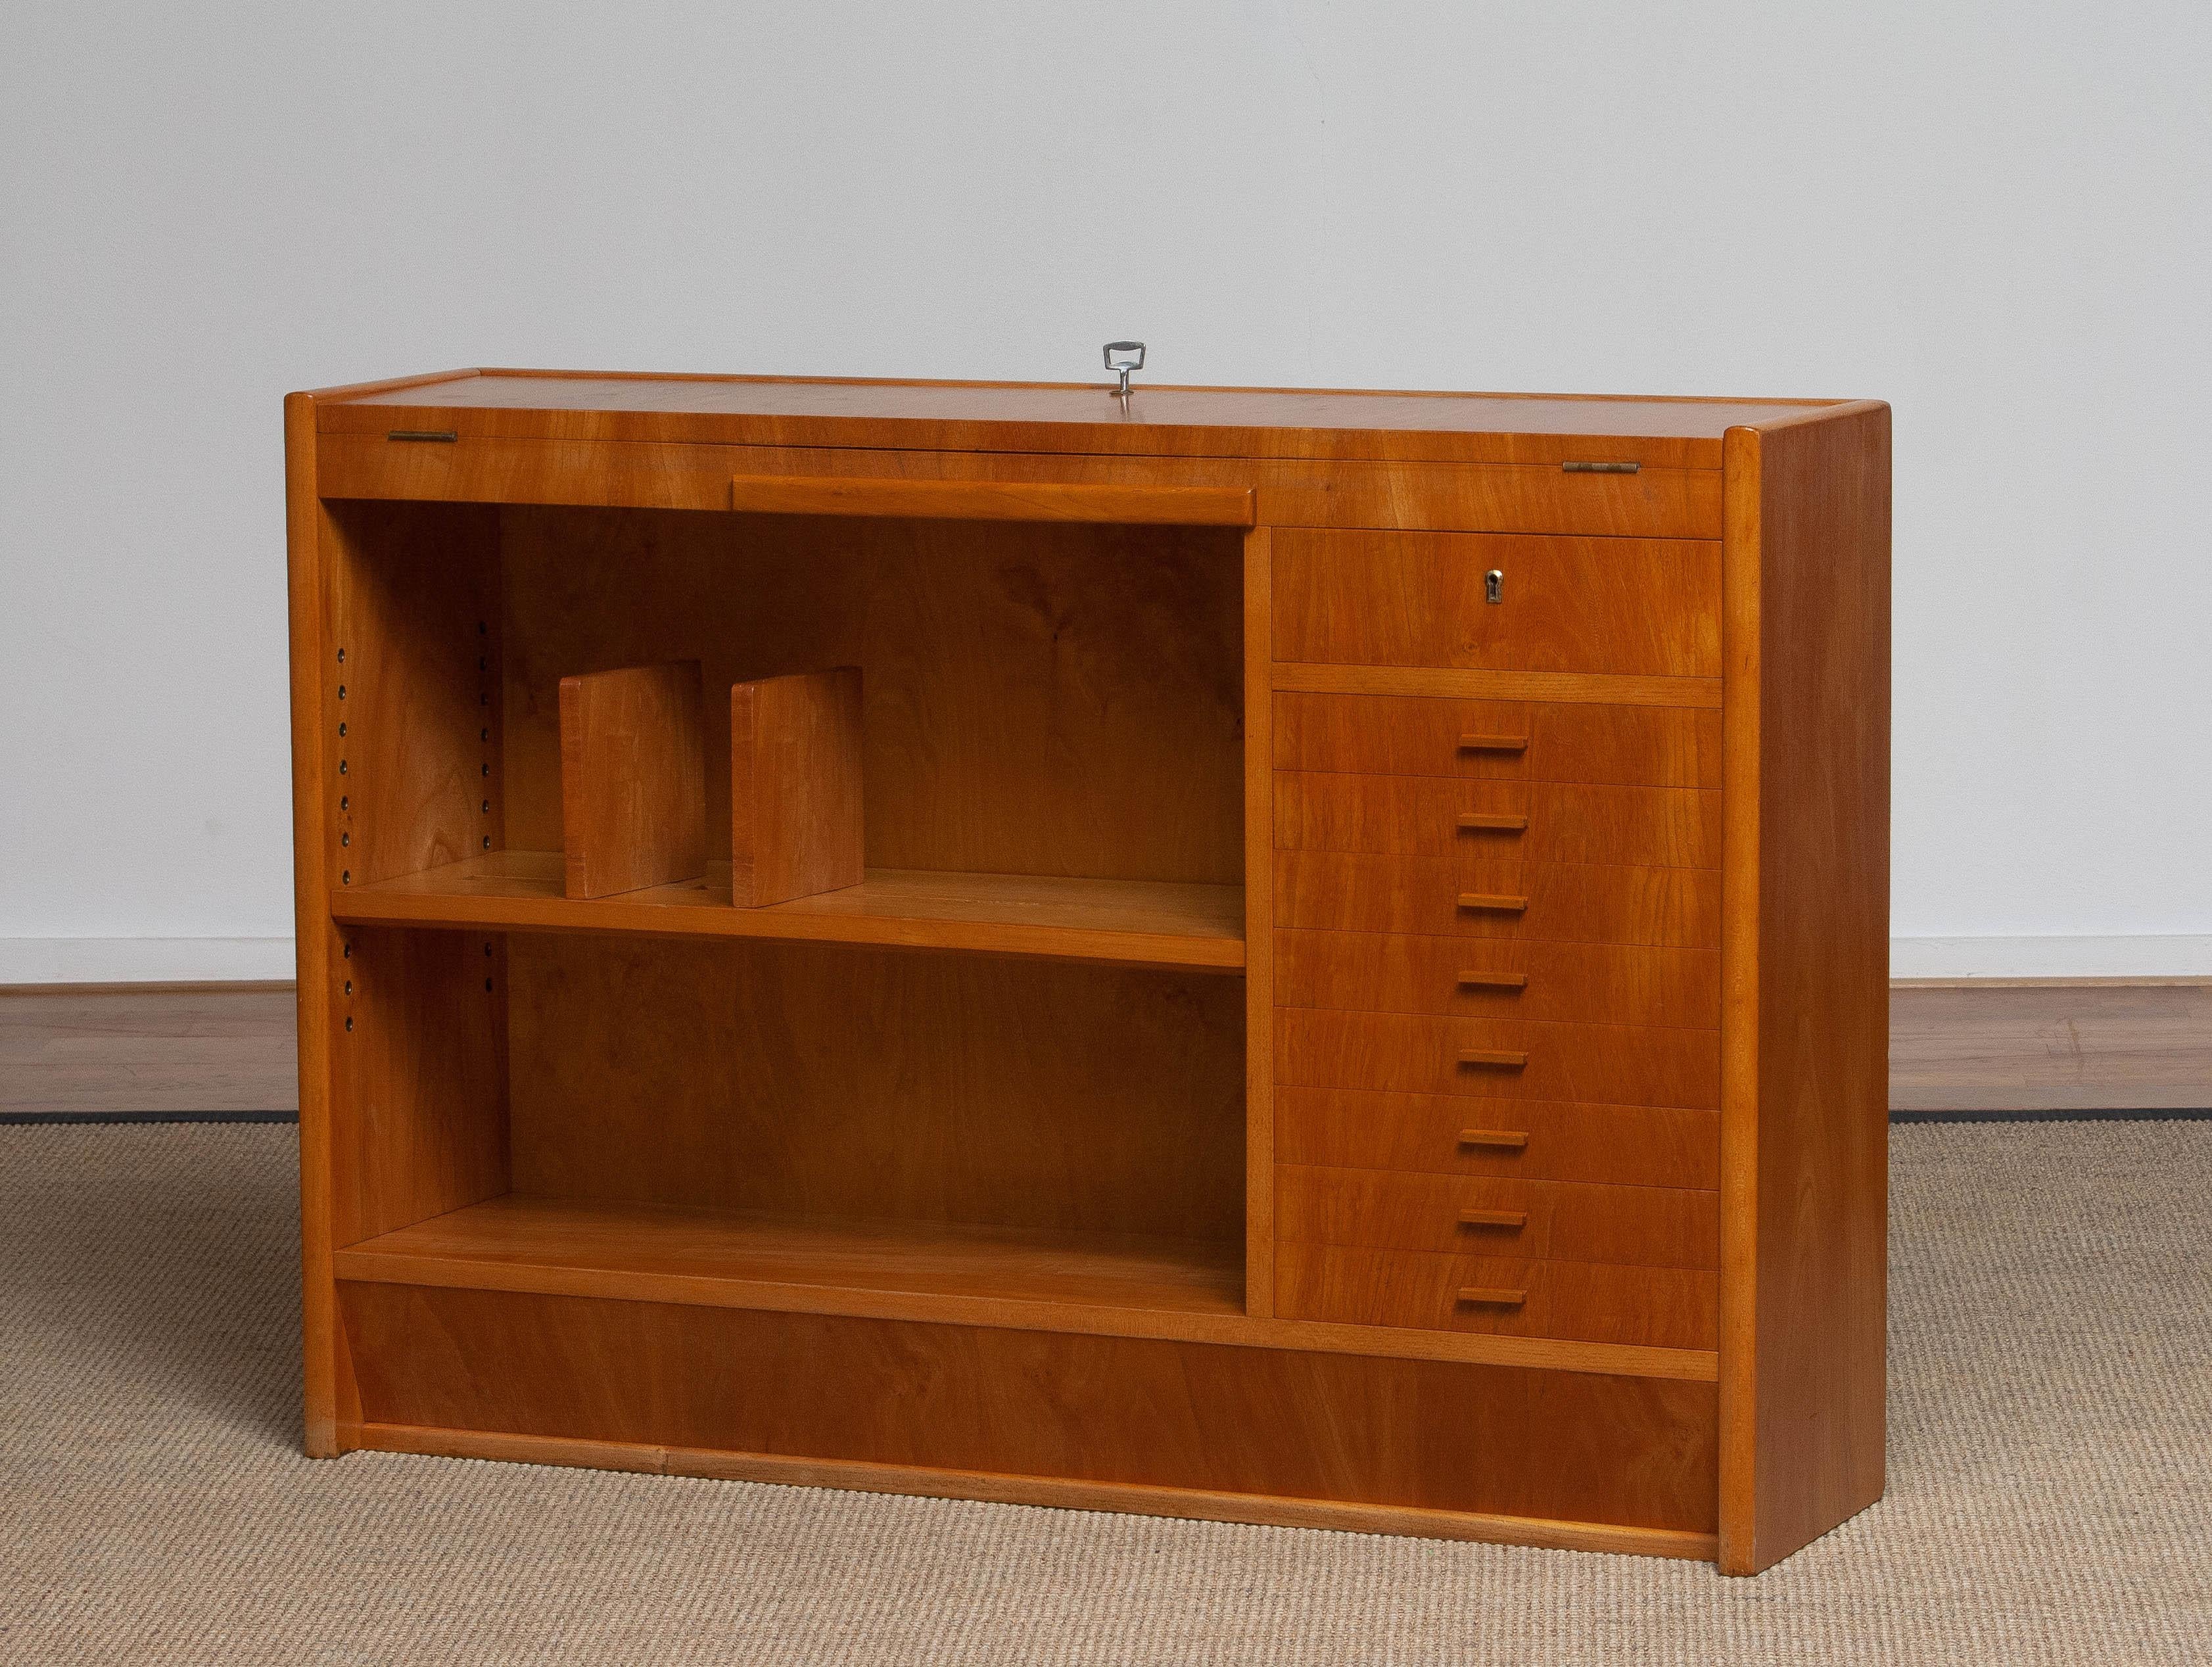 Absolutely great quality and beautiful Scandinavian slim oak writing desk or working bench build in the 1940s in Sweden consists; One adjustable bookshelf with adjustable supports a open folding top with two lower section to store.
Eight drawers